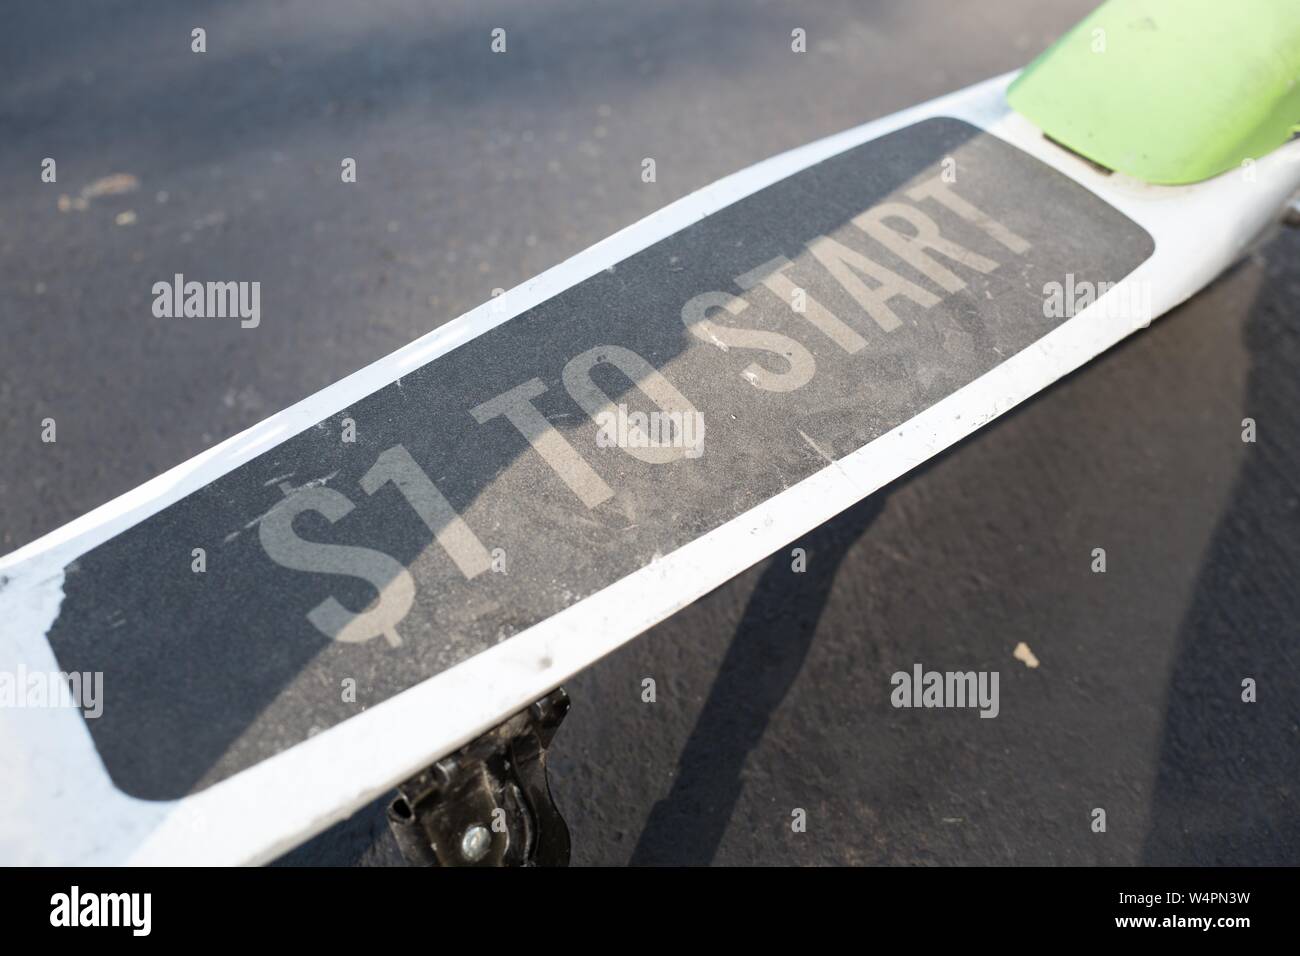 Close-up of running board on a Lime dockless electric scooter in San Ramon, California parked on an asphalt road surface, with text reading $1 to start, describing the pricing model for riders of the scooter, October 18, 2018. () Stock Photo